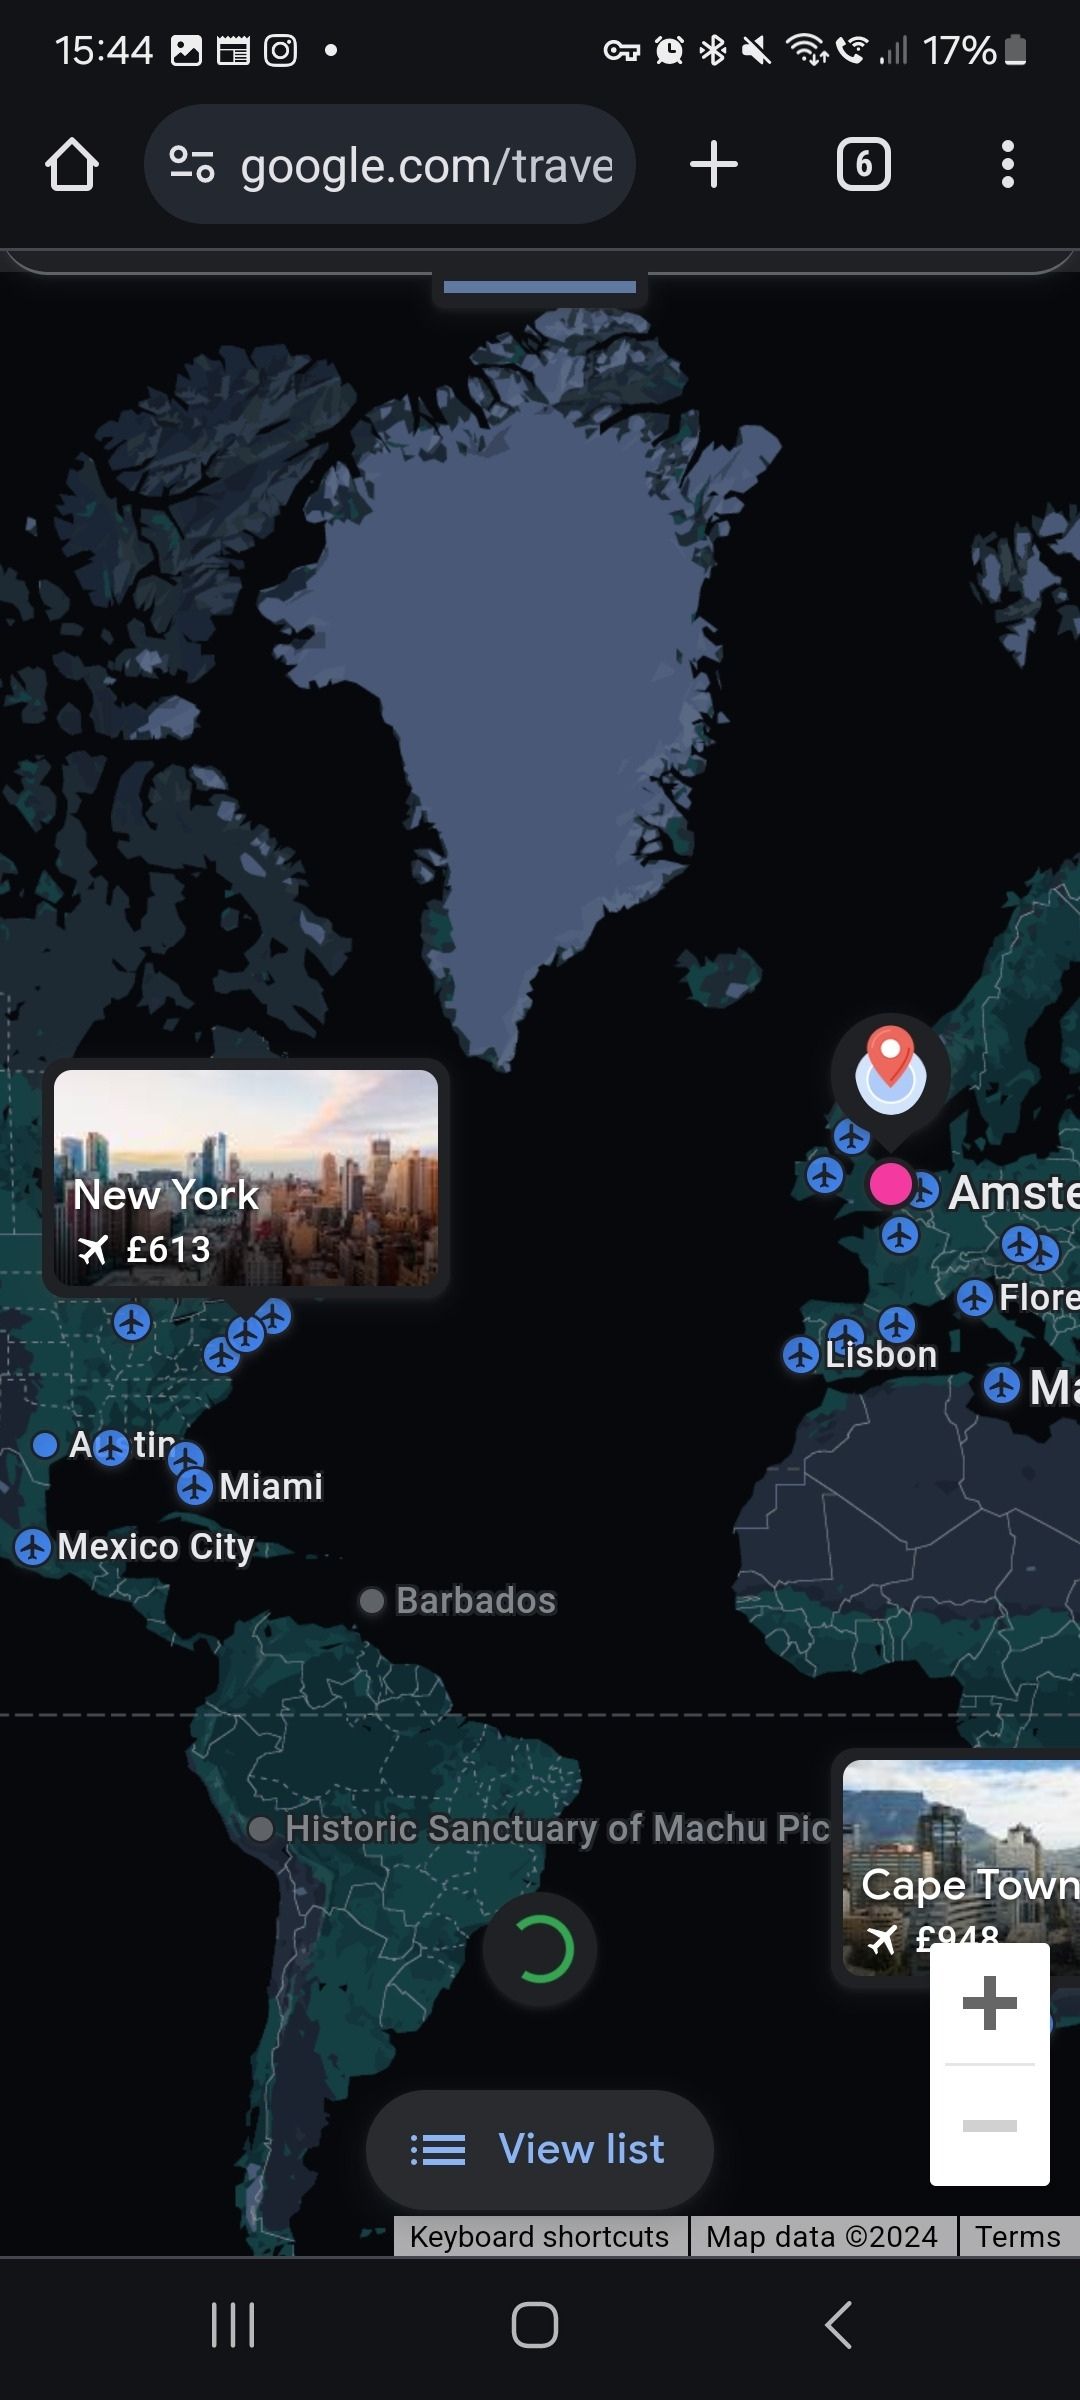 explore Google tool with the map zoomed out